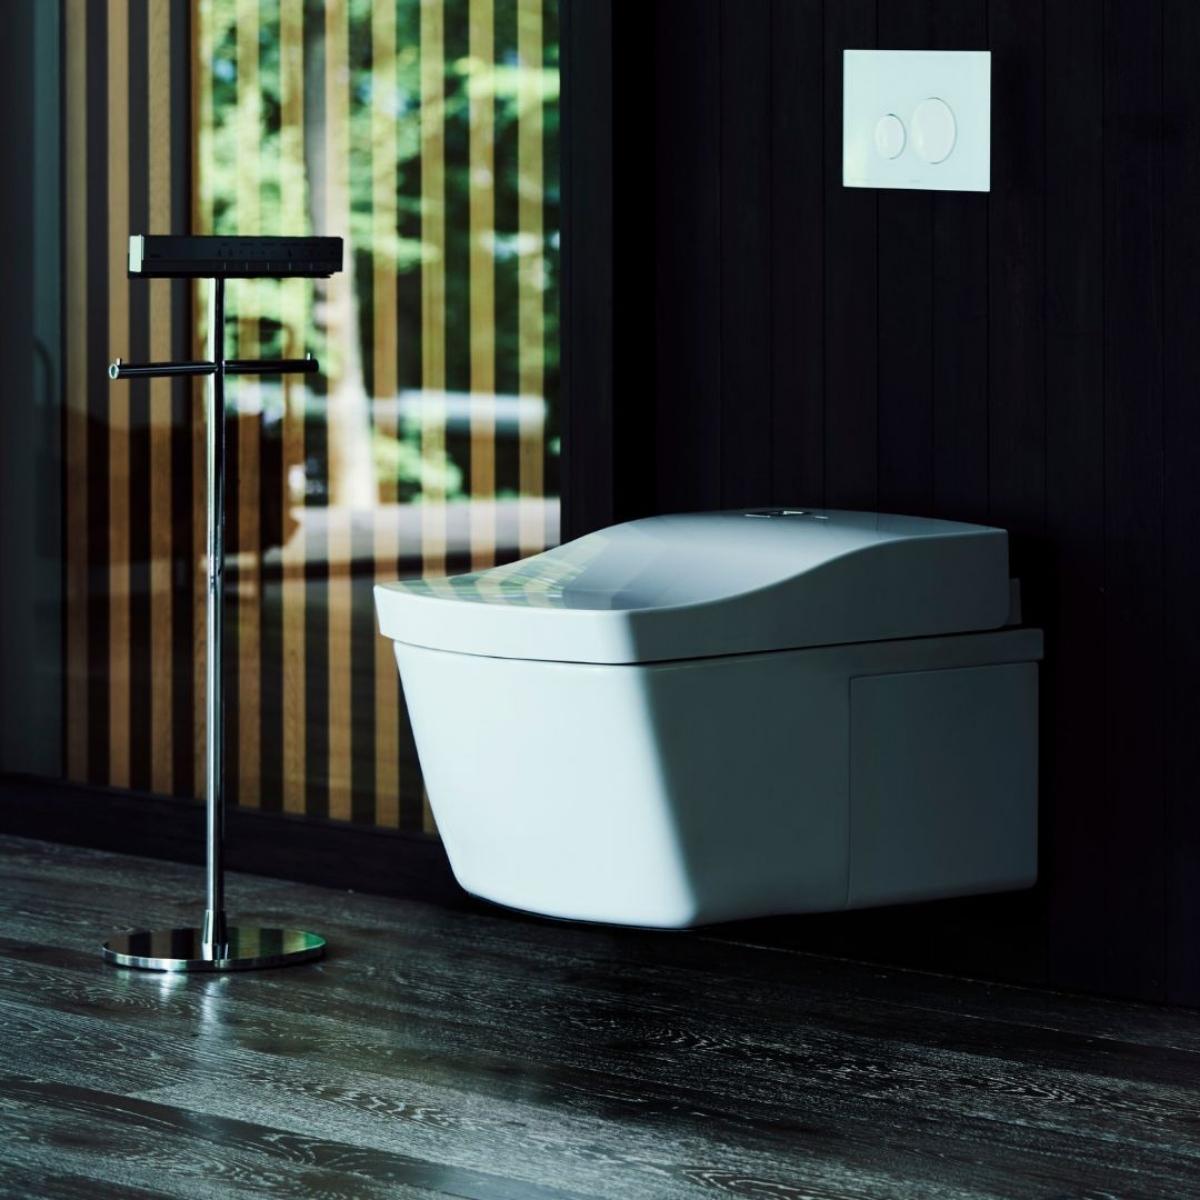 TOTO NEOREST LE I WALL HUNG INTEGRATED TOILET AND WASHLET W/ SILVER REMOTE PACKAGE GLOSS WHITE